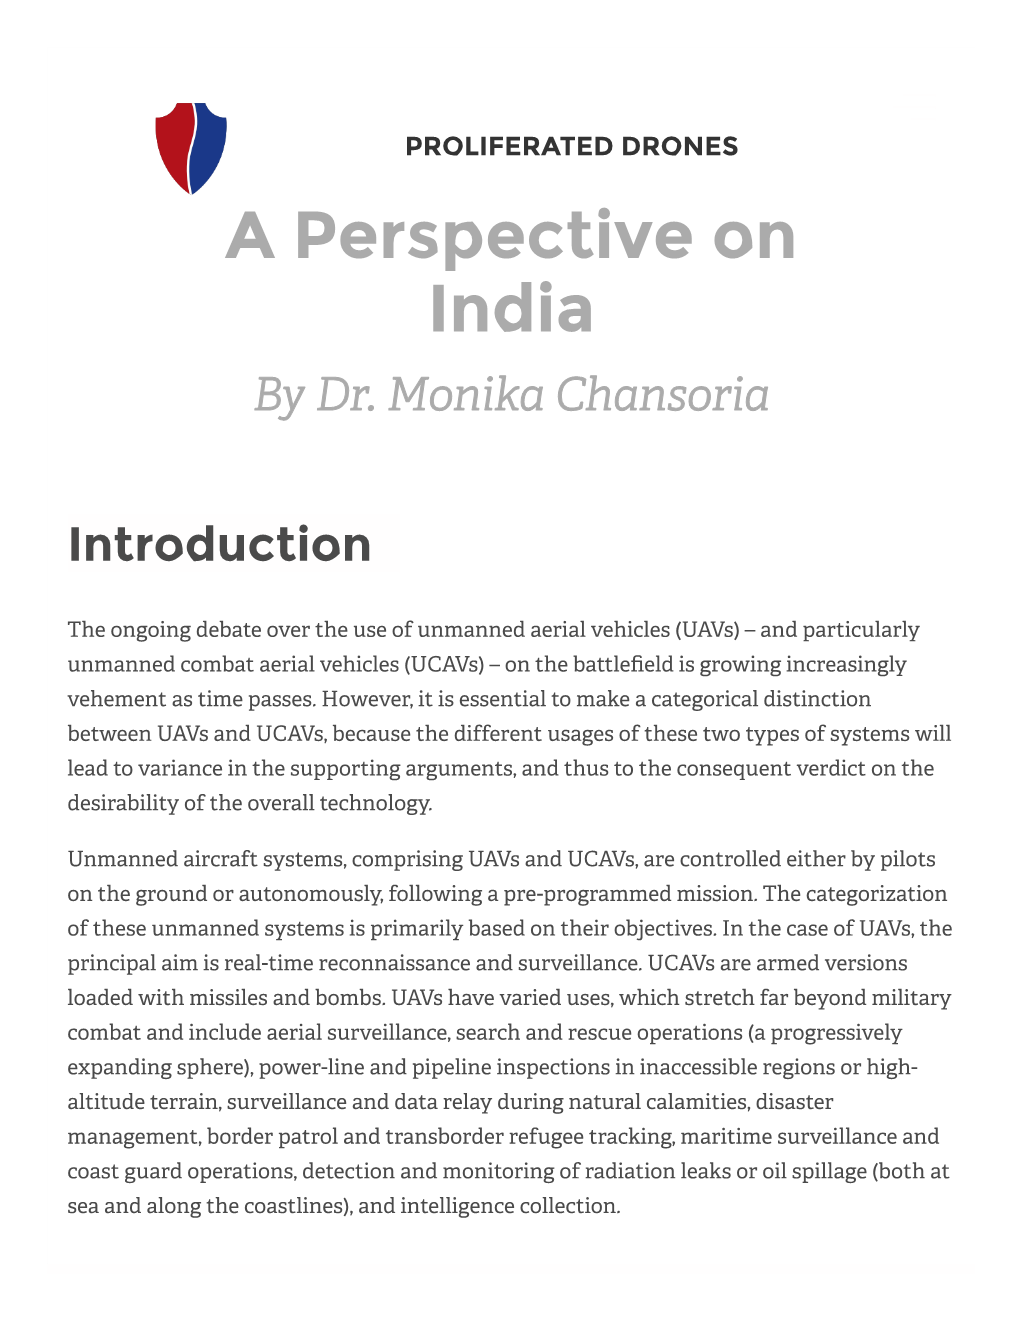 A Perspective on India by Dr